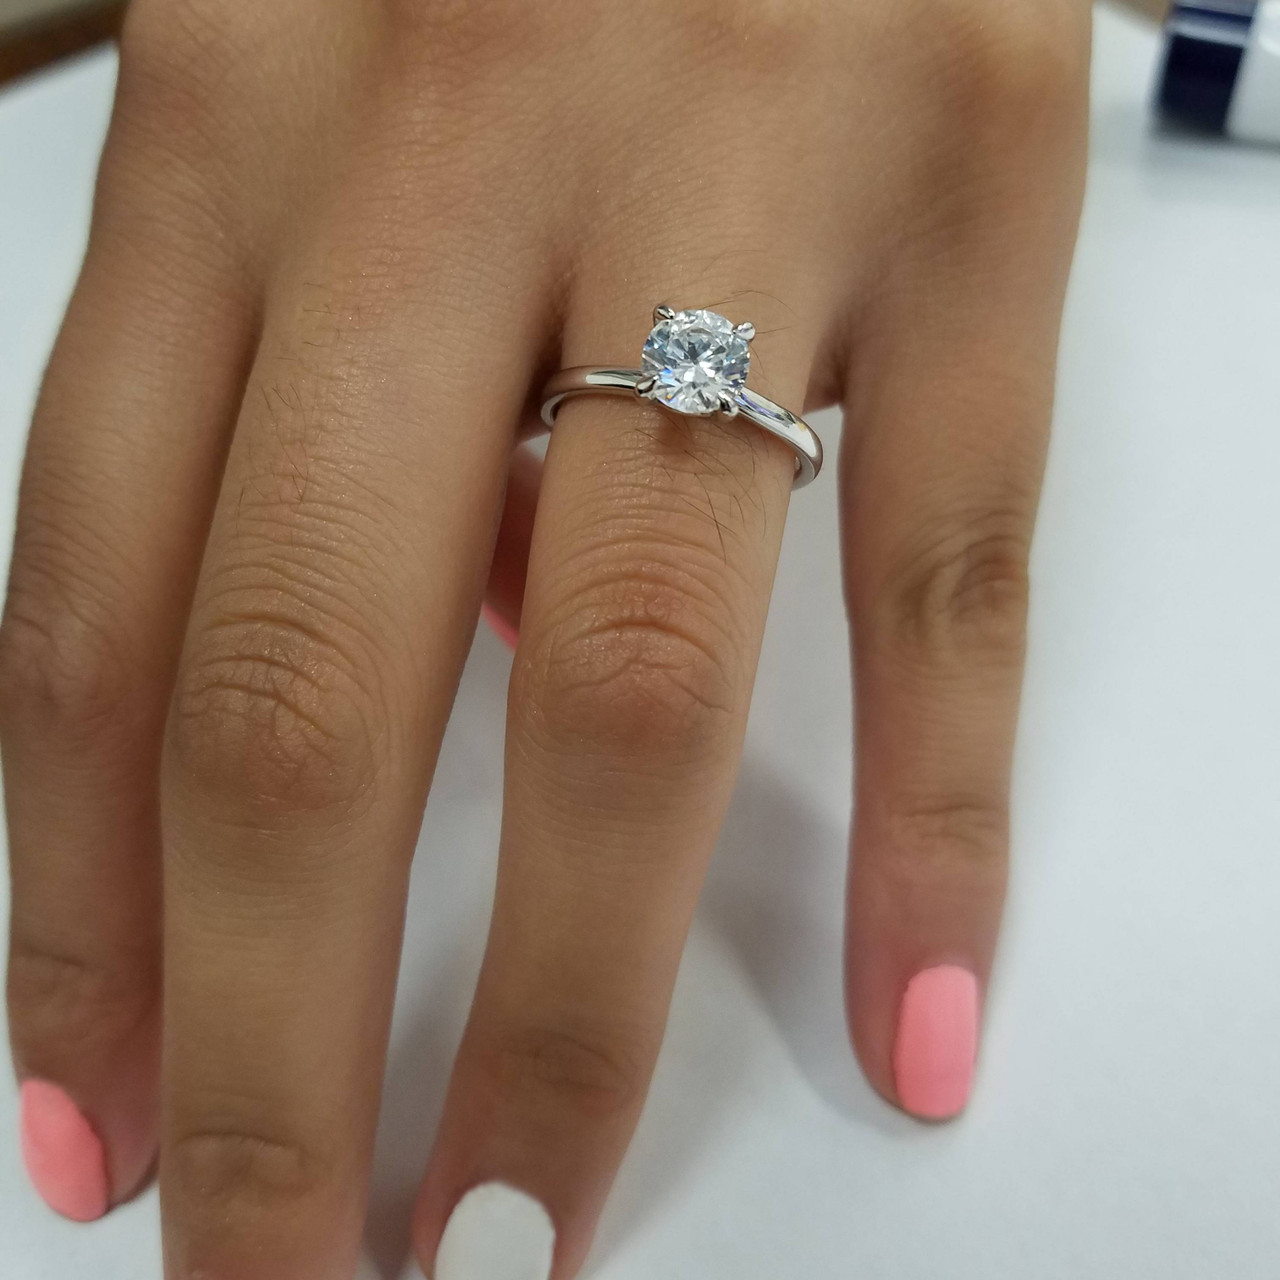 1 carat engagement rings on hand